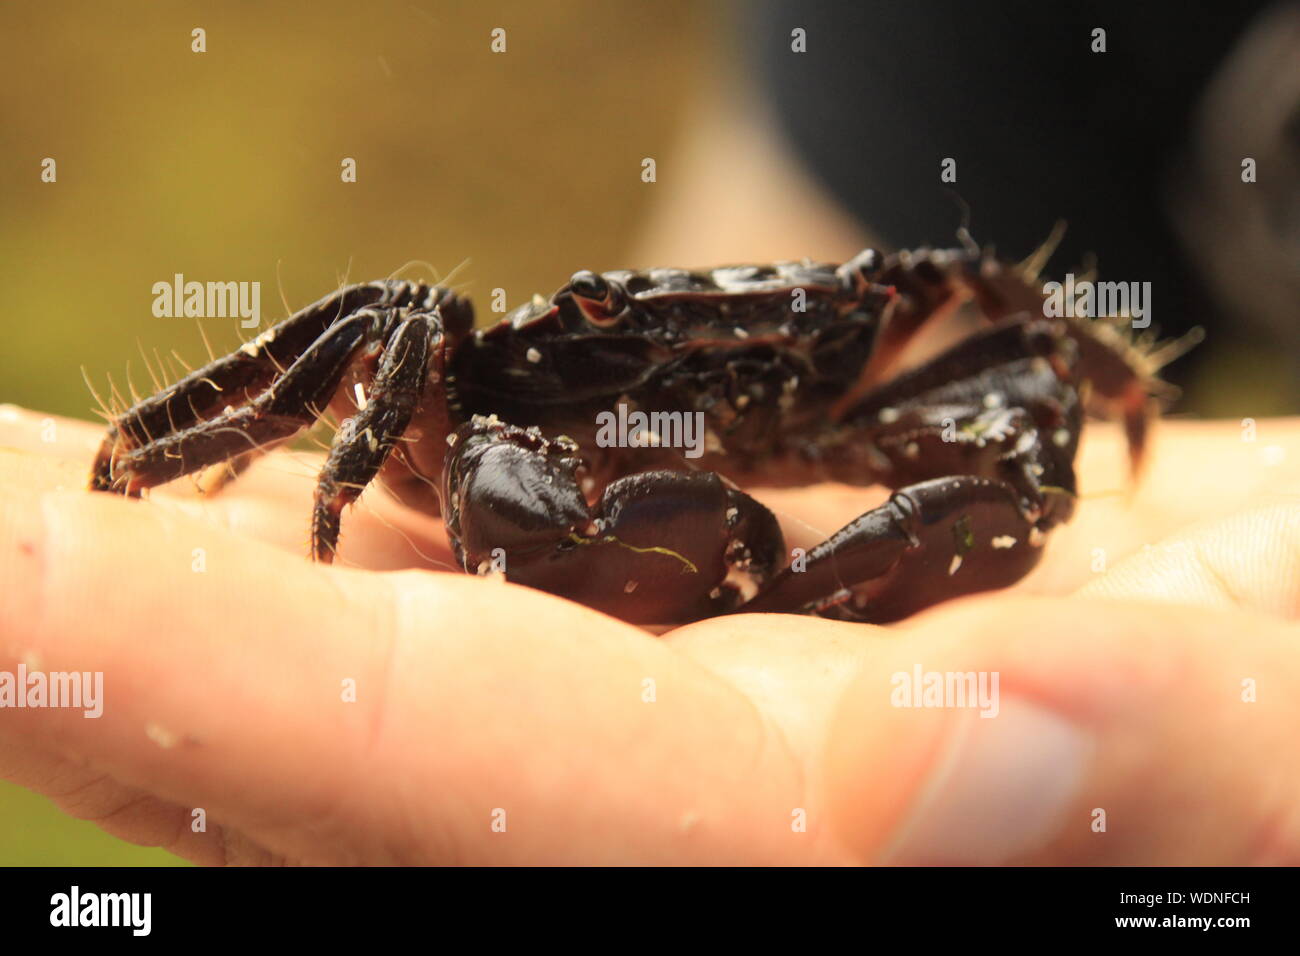 Close-up Of Black Crab On Human Palm Stock Photo